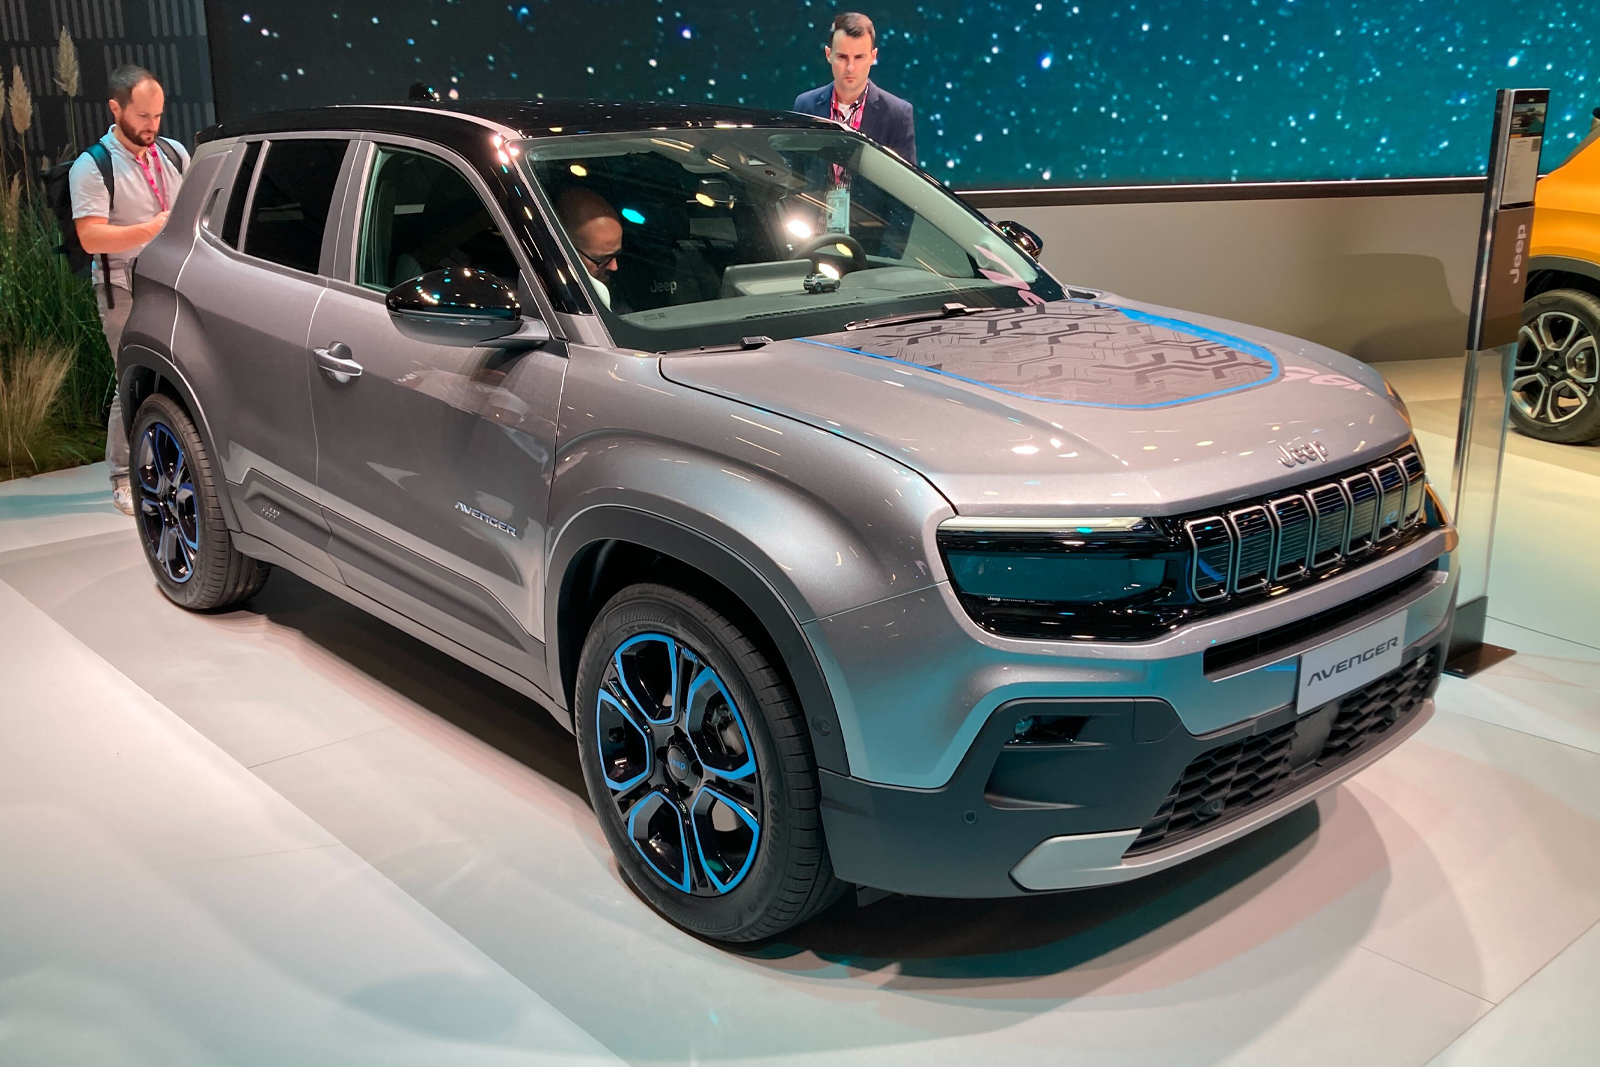 Jeep Avenger Electric SUV Announced - Reveal In October 2022